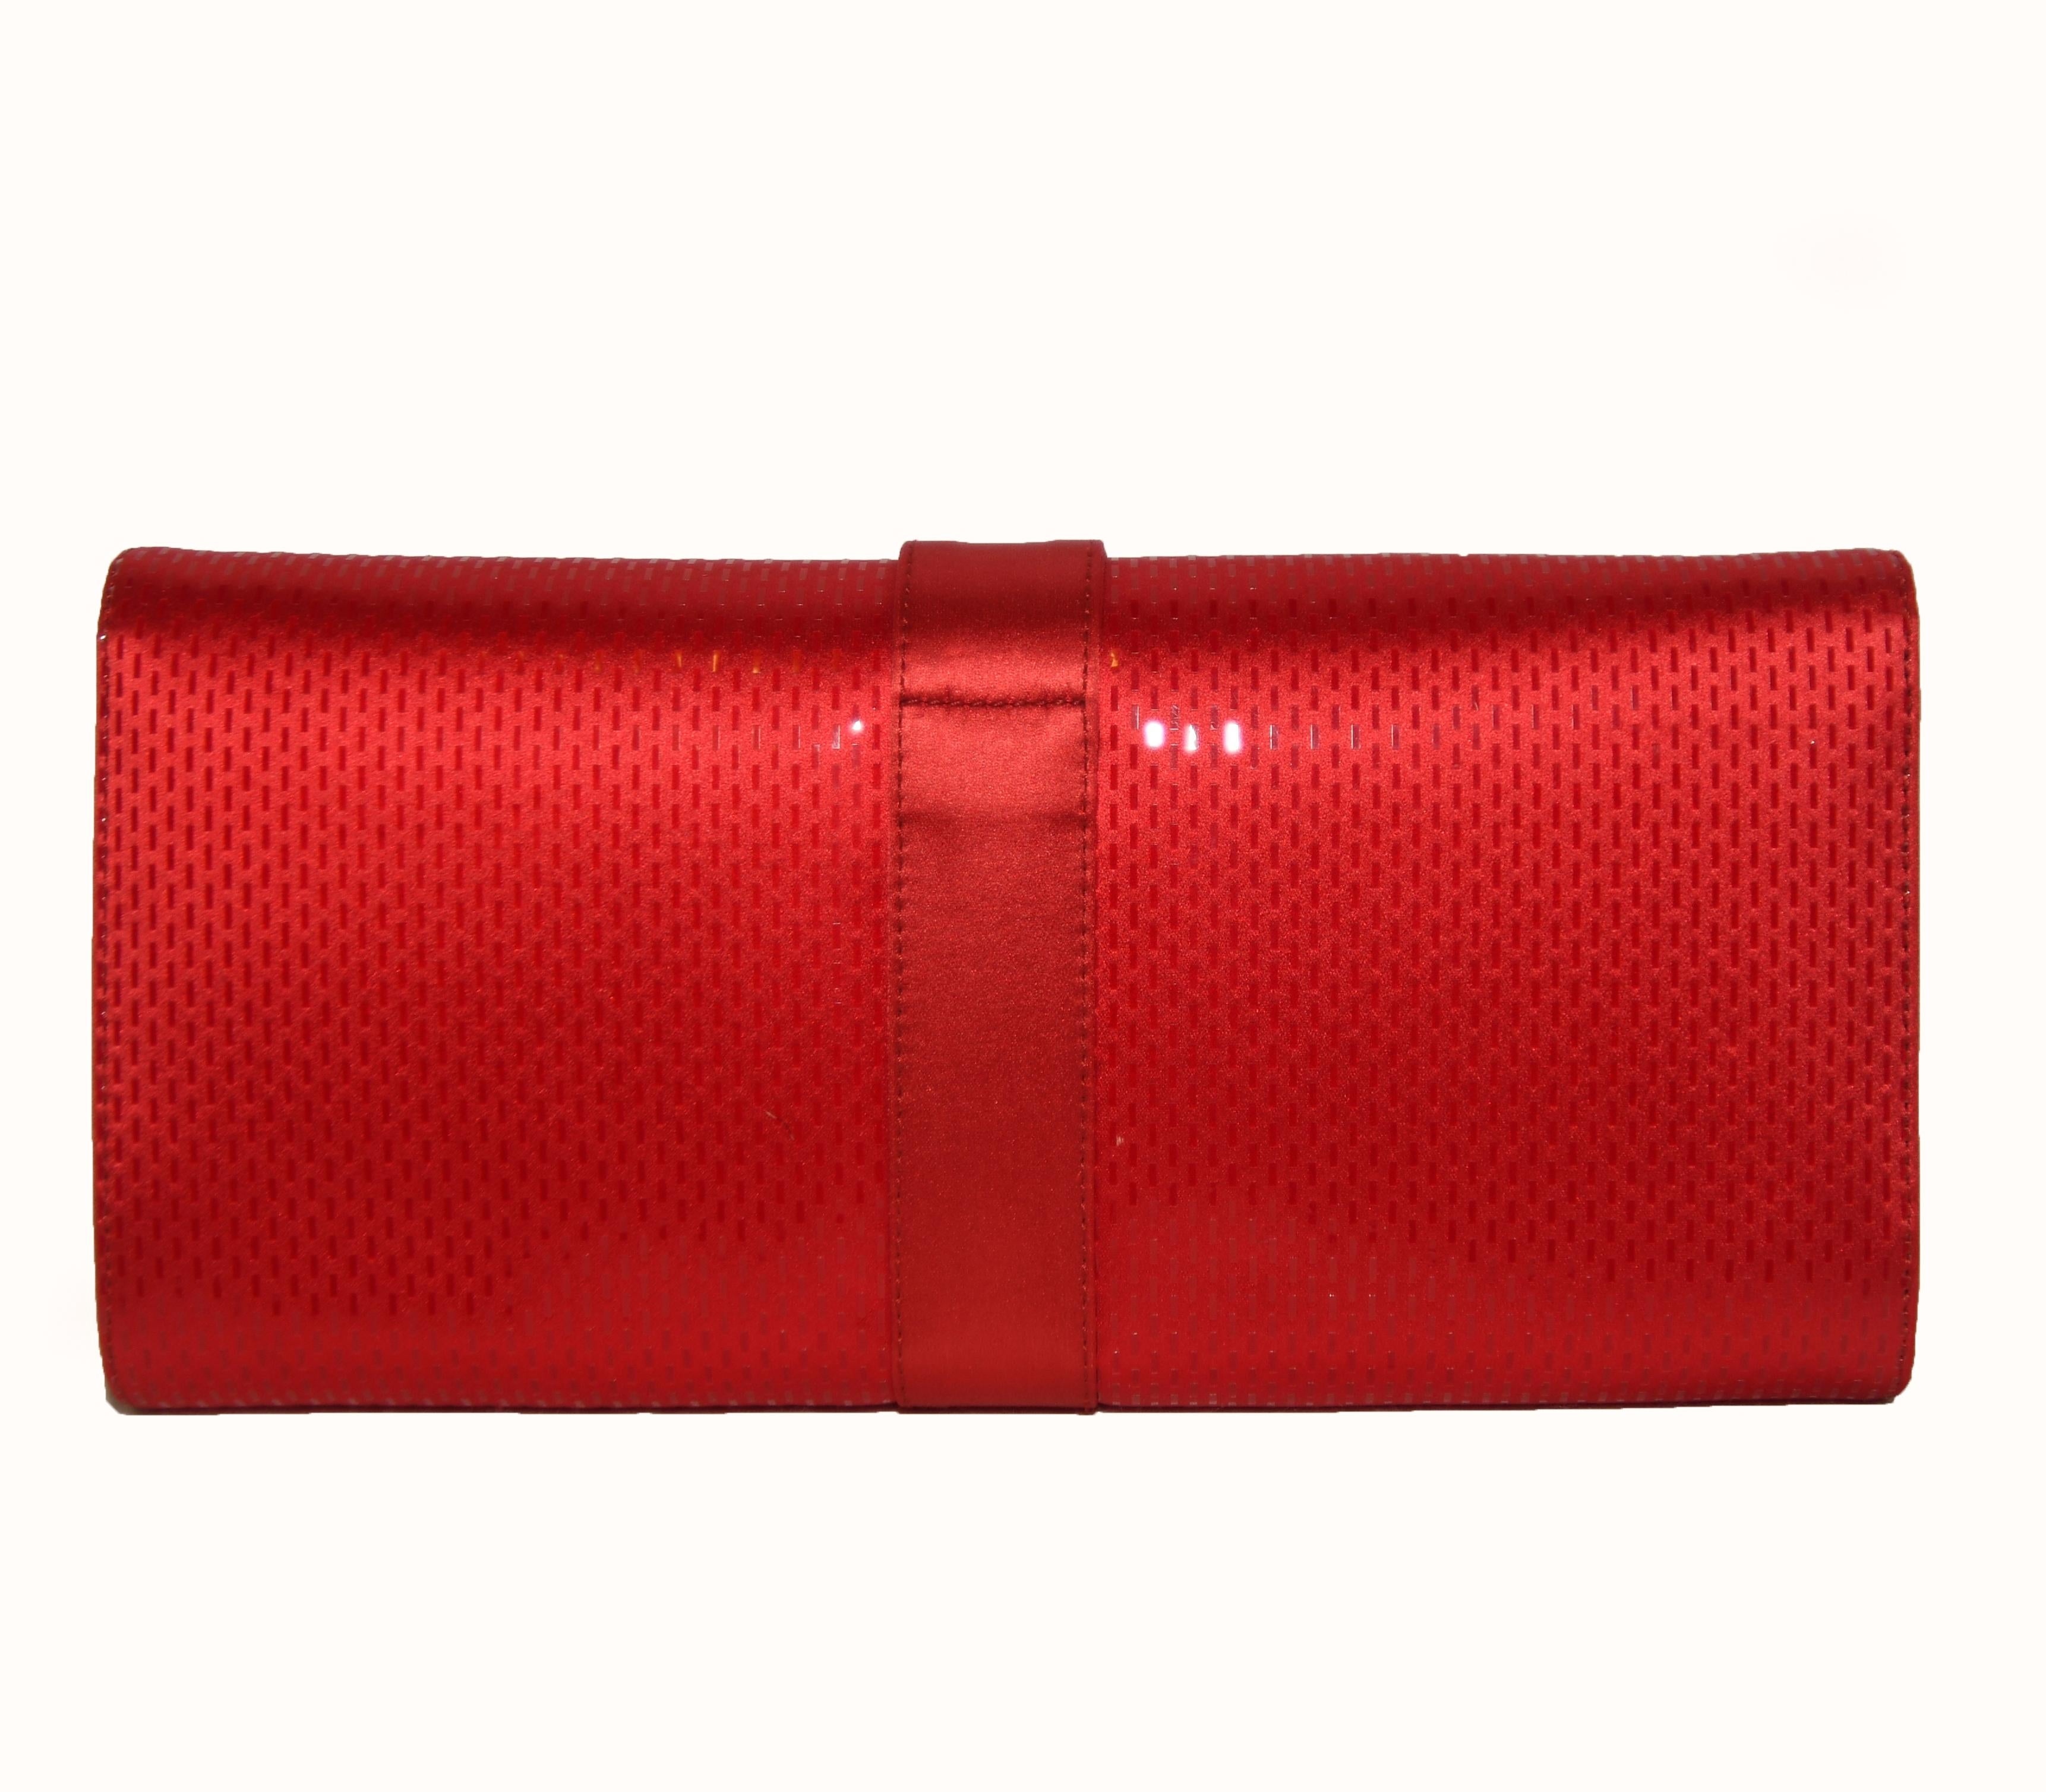 St John Red Sequined Satin Clutch W/ Crystal Buckle At Closure Damen